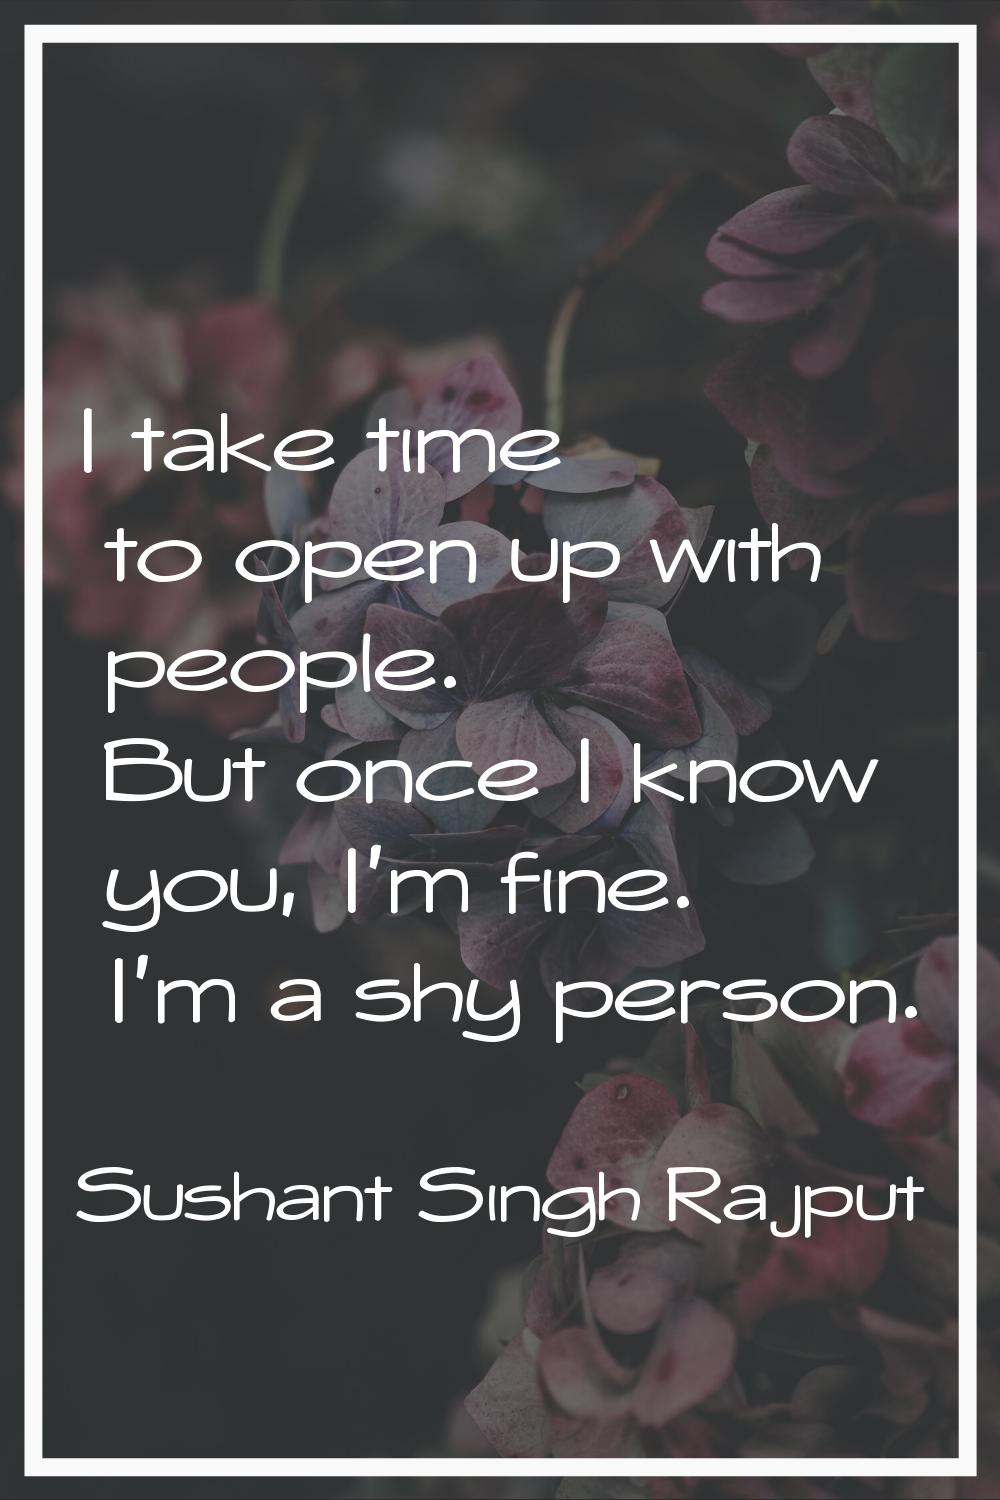 I take time to open up with people. But once I know you, I'm fine. I'm a shy person.